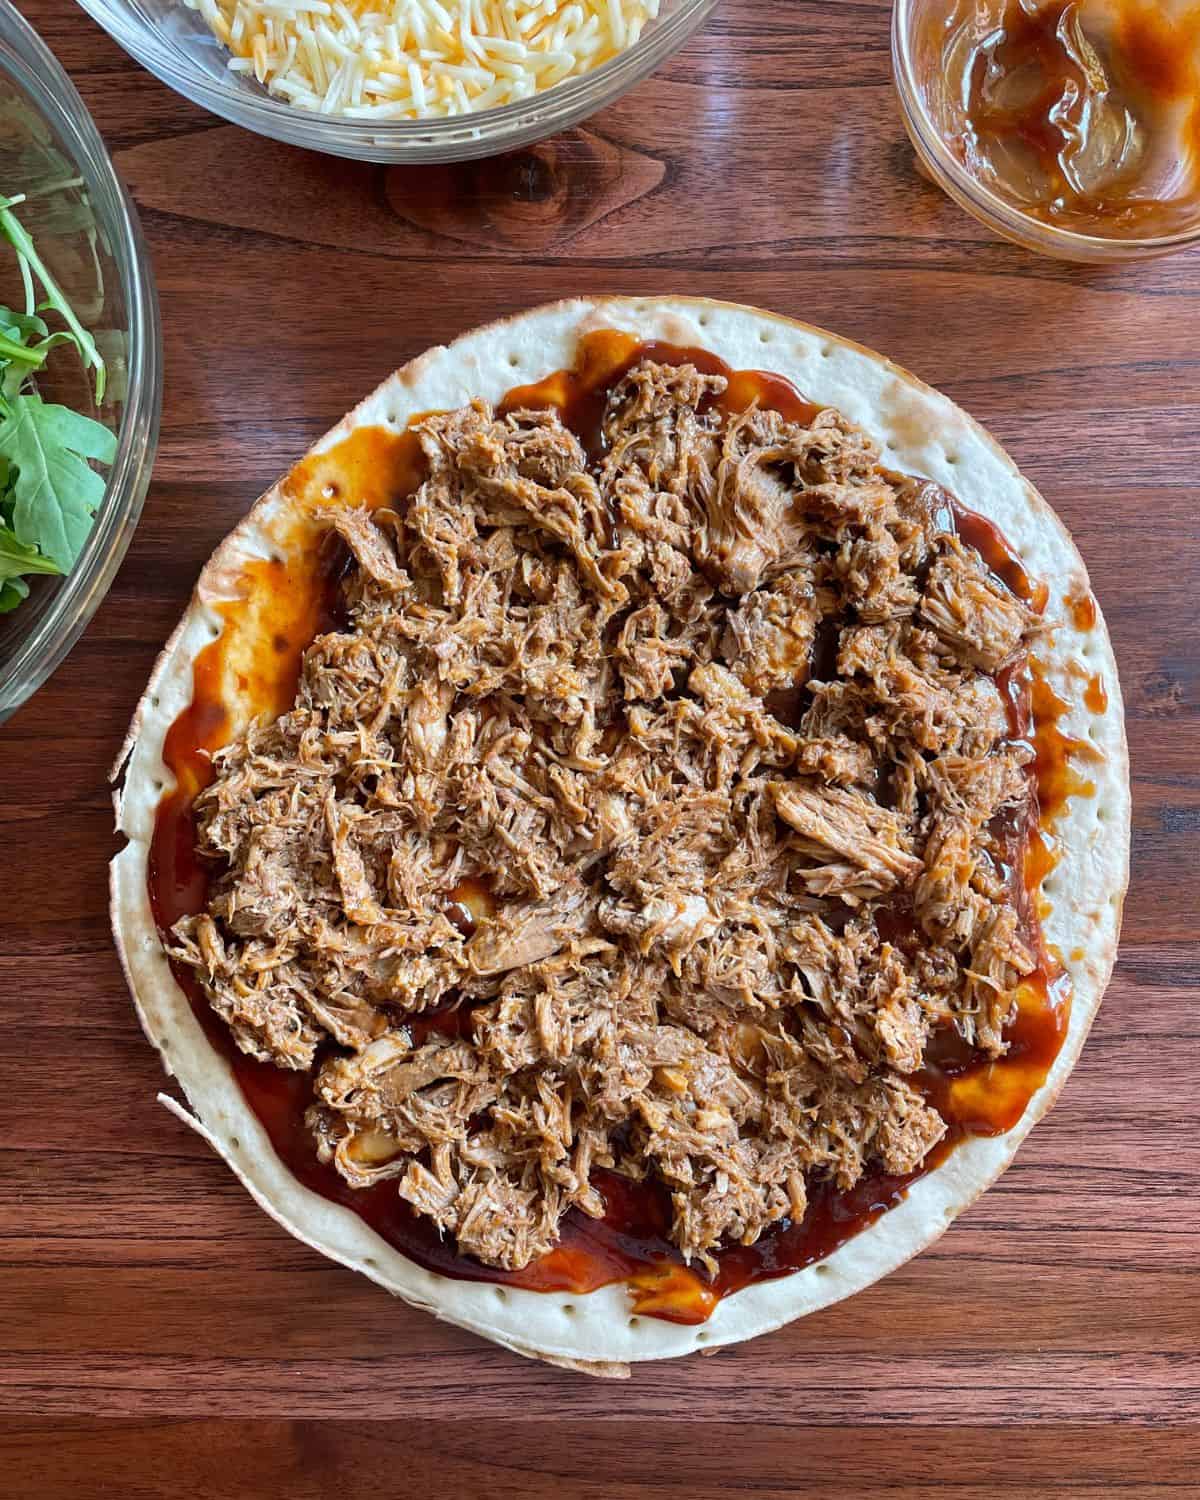 Pizza shell covered in BBQ sauce and pulled pork.